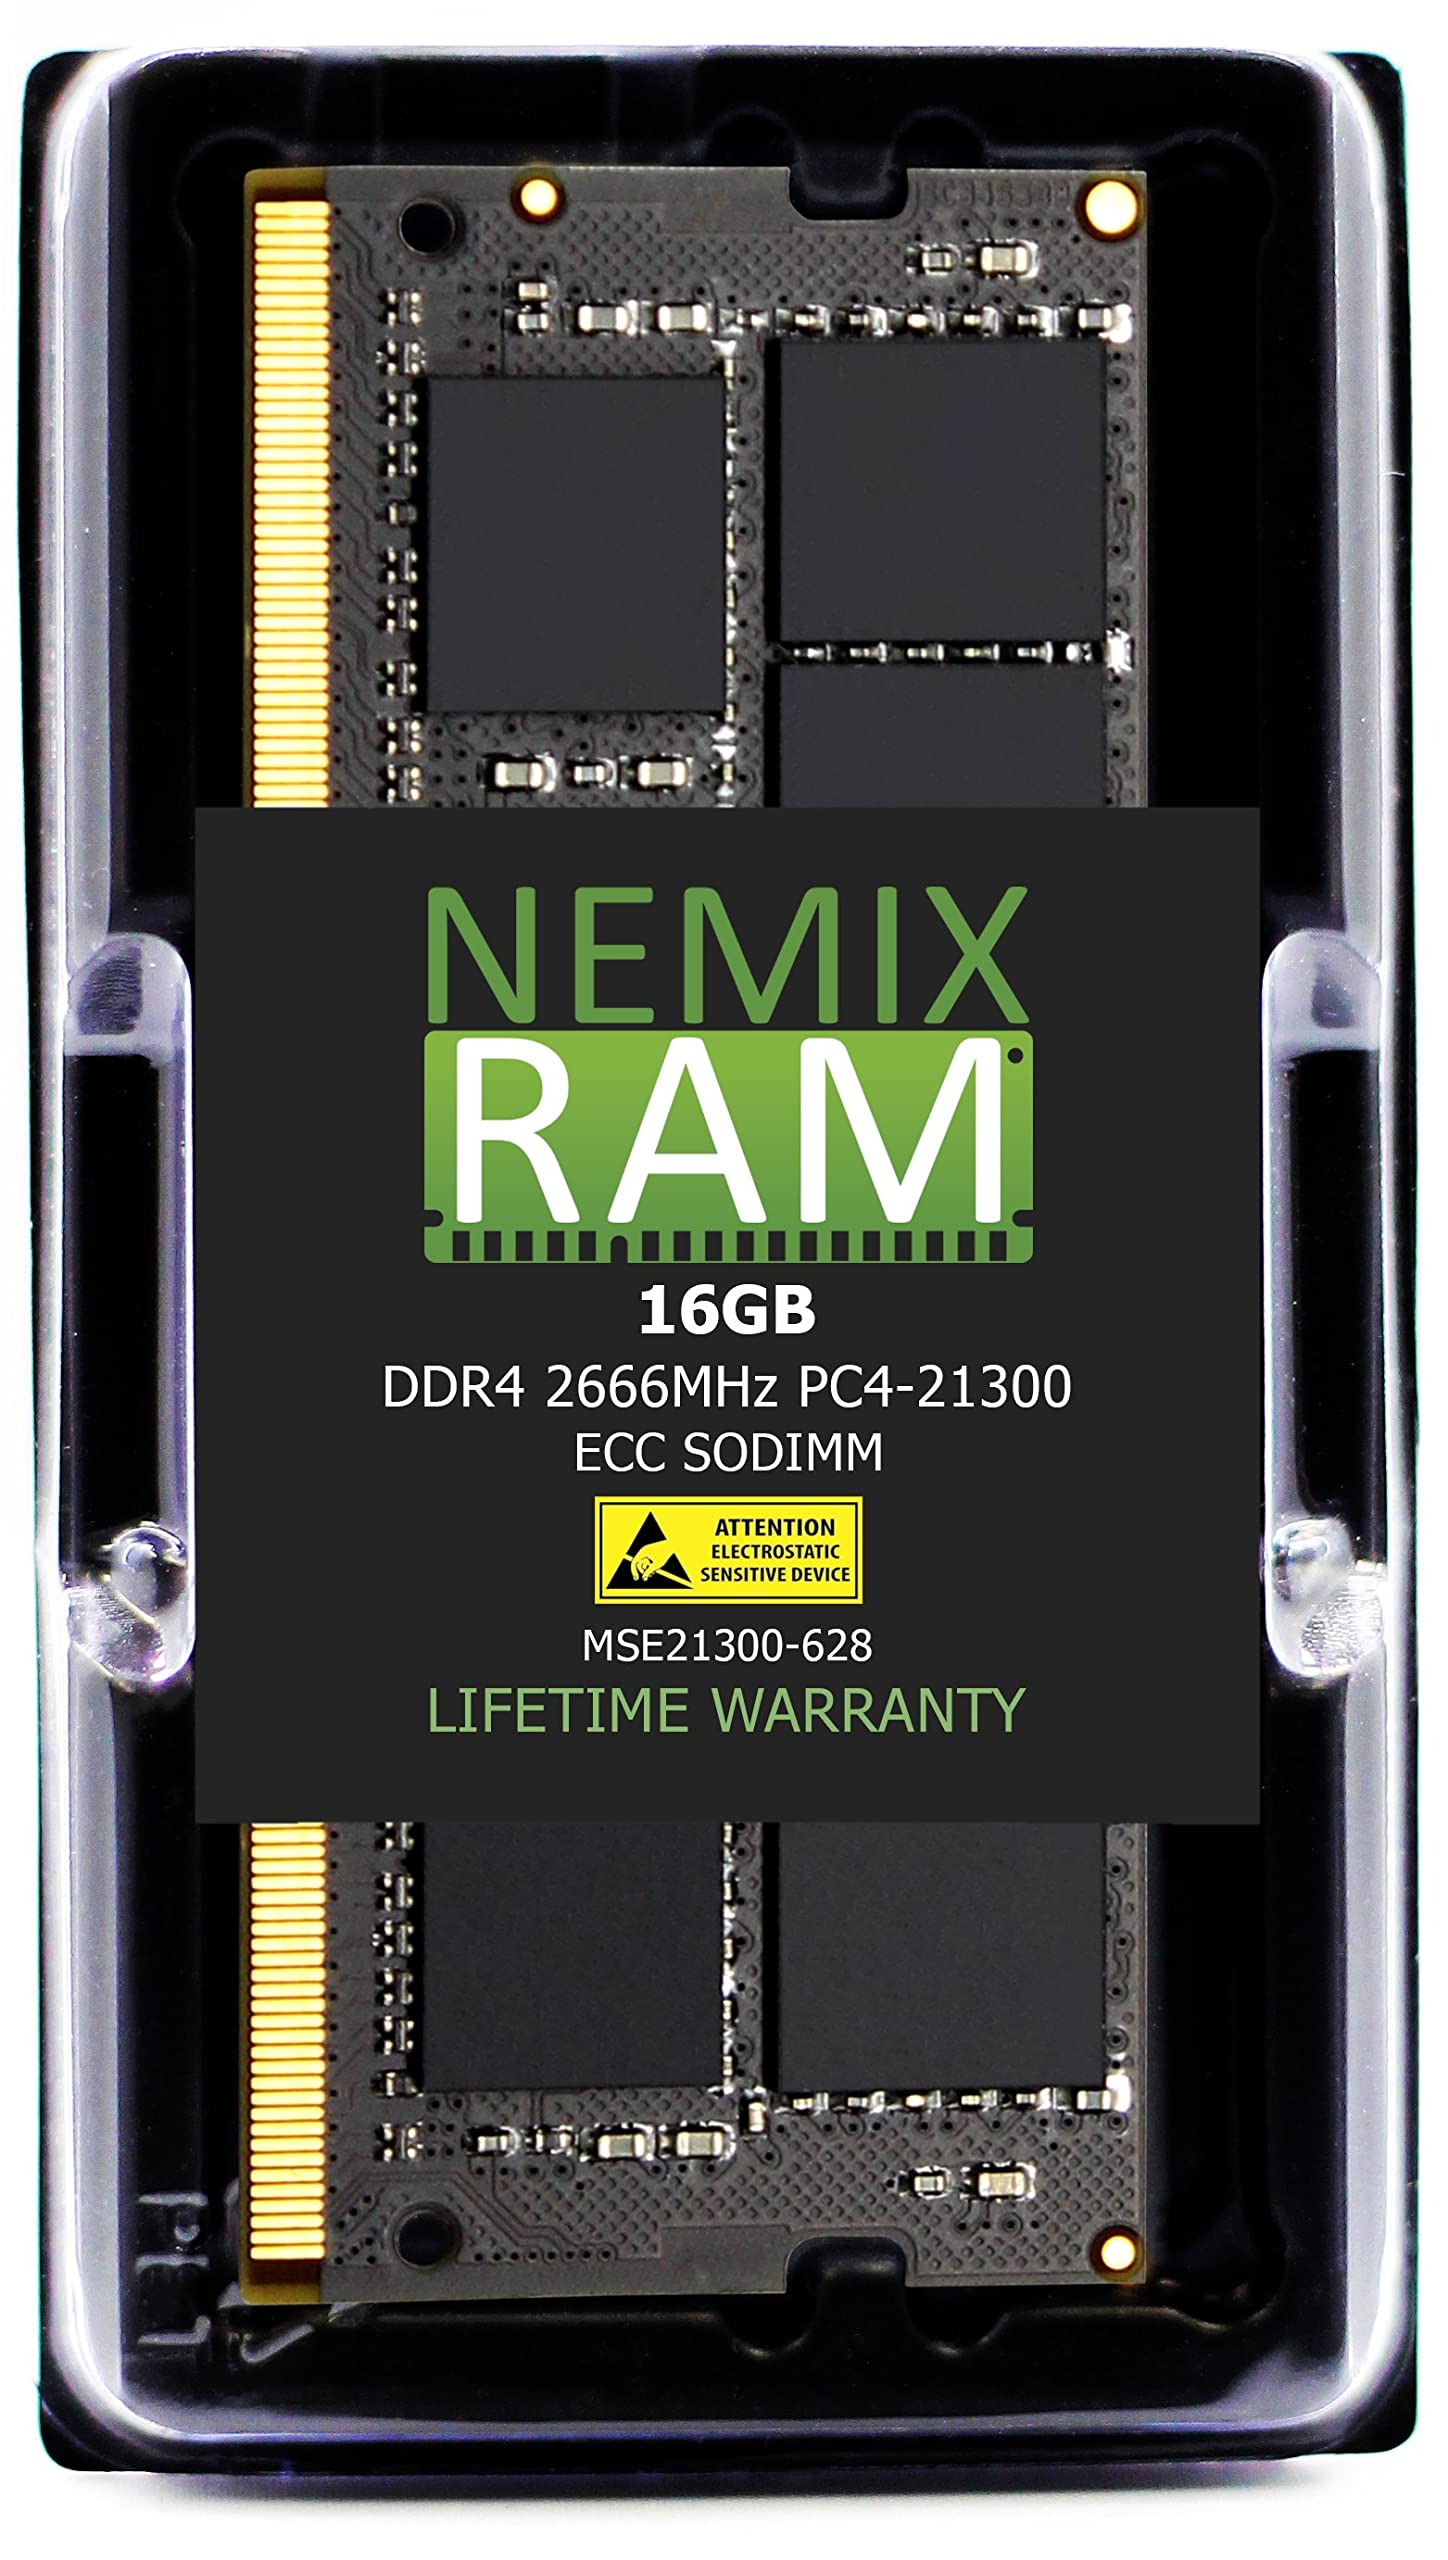 16GB DDR4-2666 PC4-21300 ECC SODIMM Compatible with Synology D4ECSO-2666-16G Memory Upgrade Module by NEMIX RAM